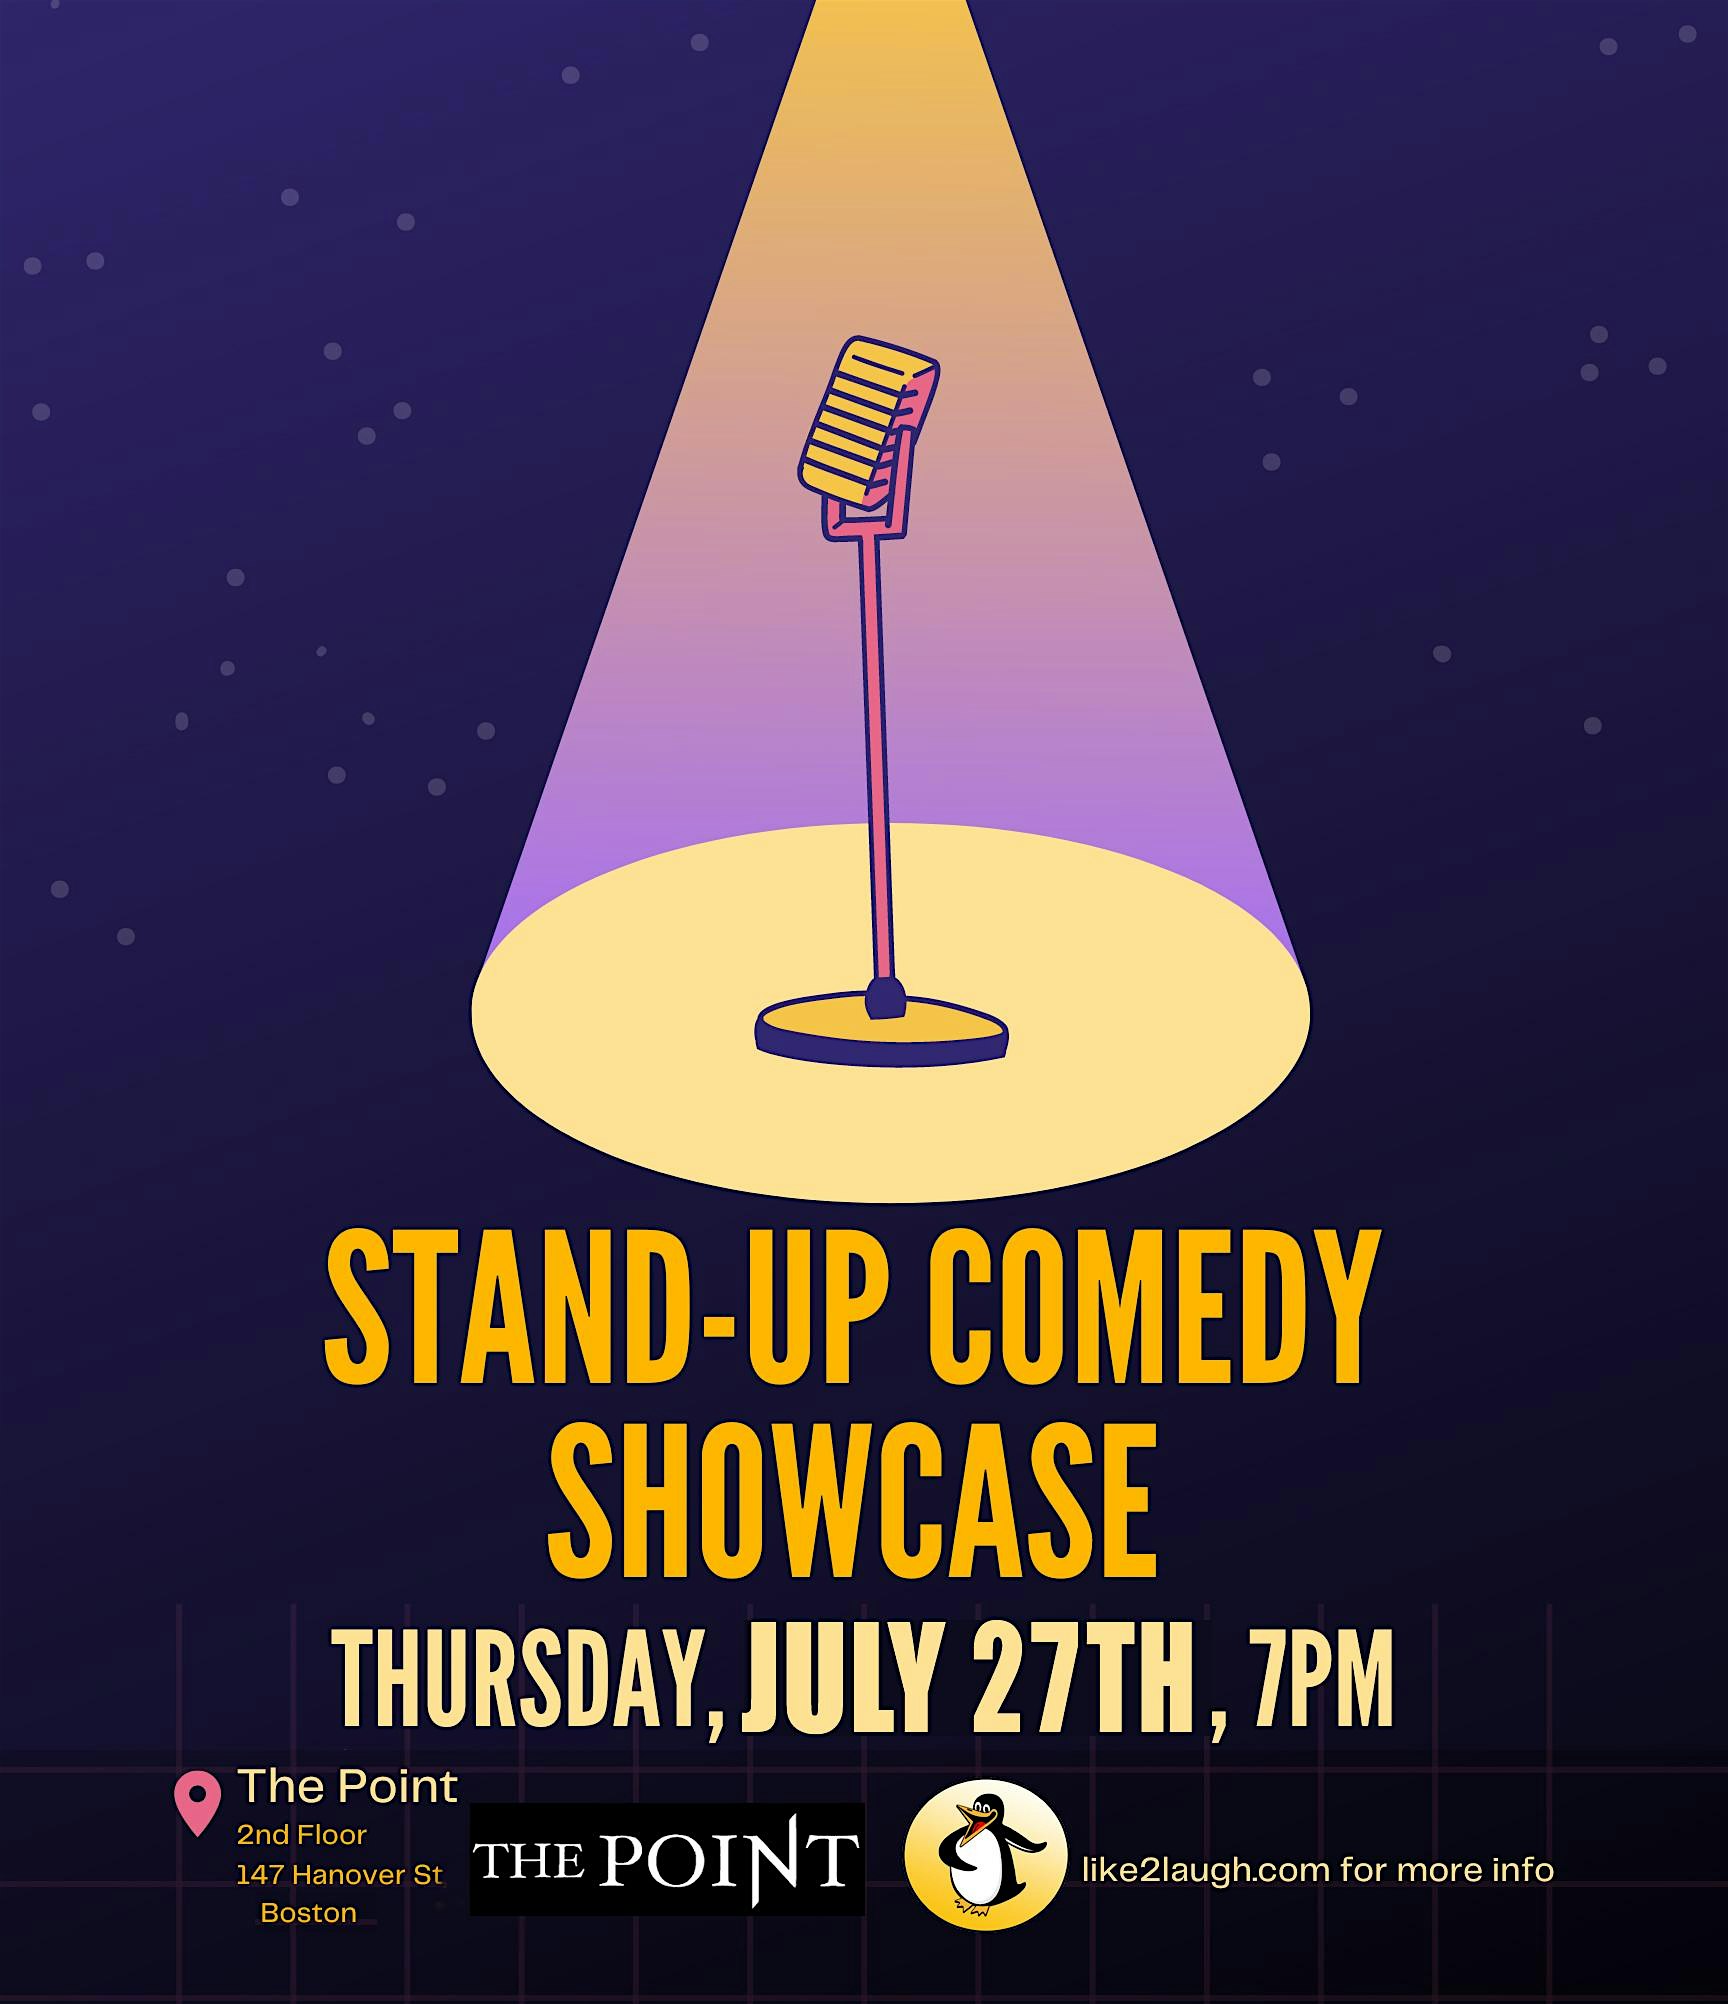 Comedy Showcase – Get to The Point in Historic Boston